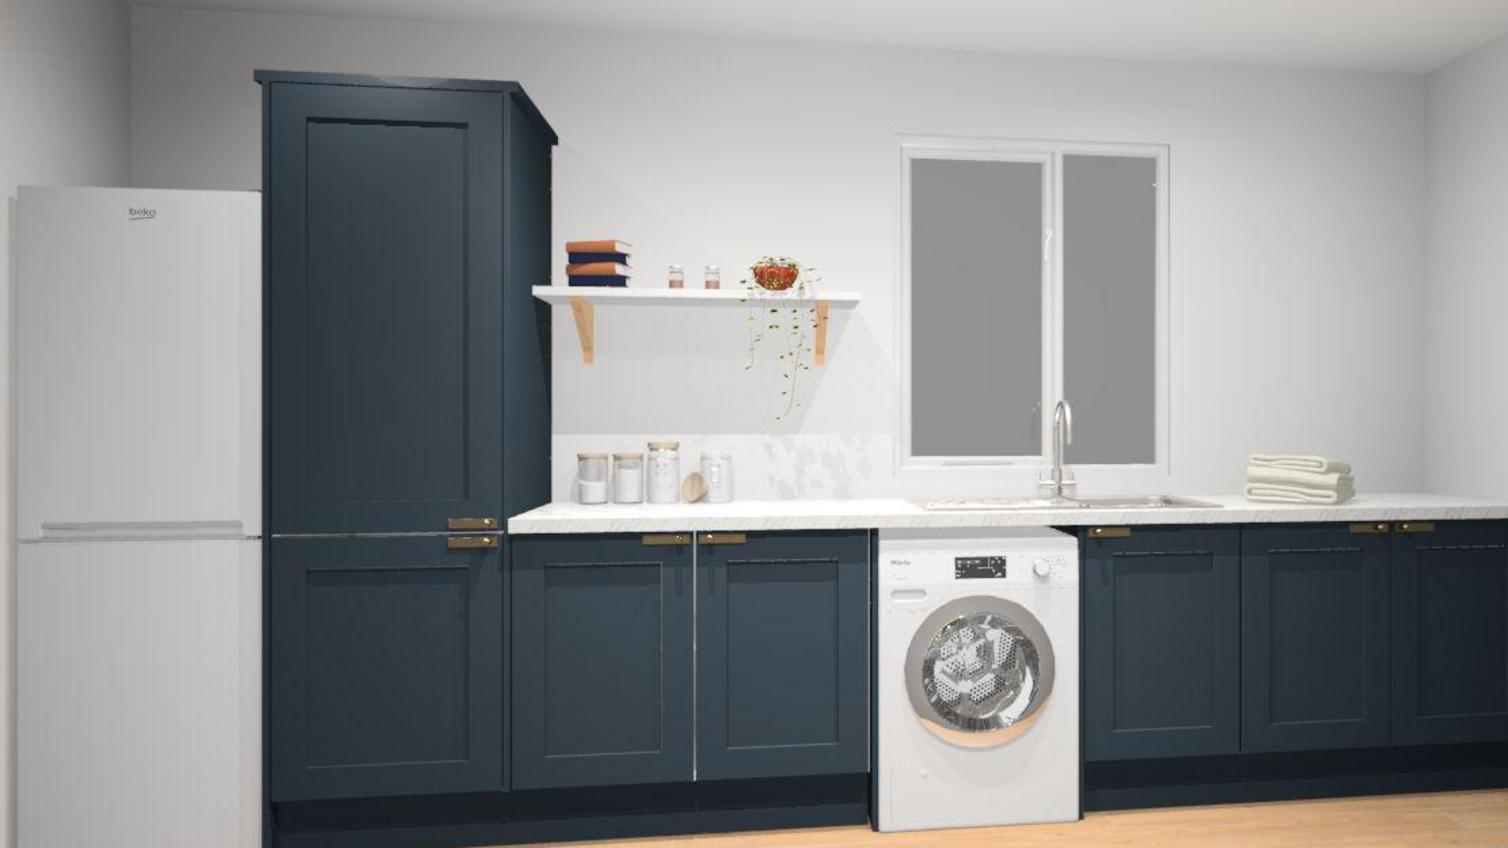 CAD plan of a navy utility room using shaker units, white worktops, timber-effect floors and a freestanding washing machine.